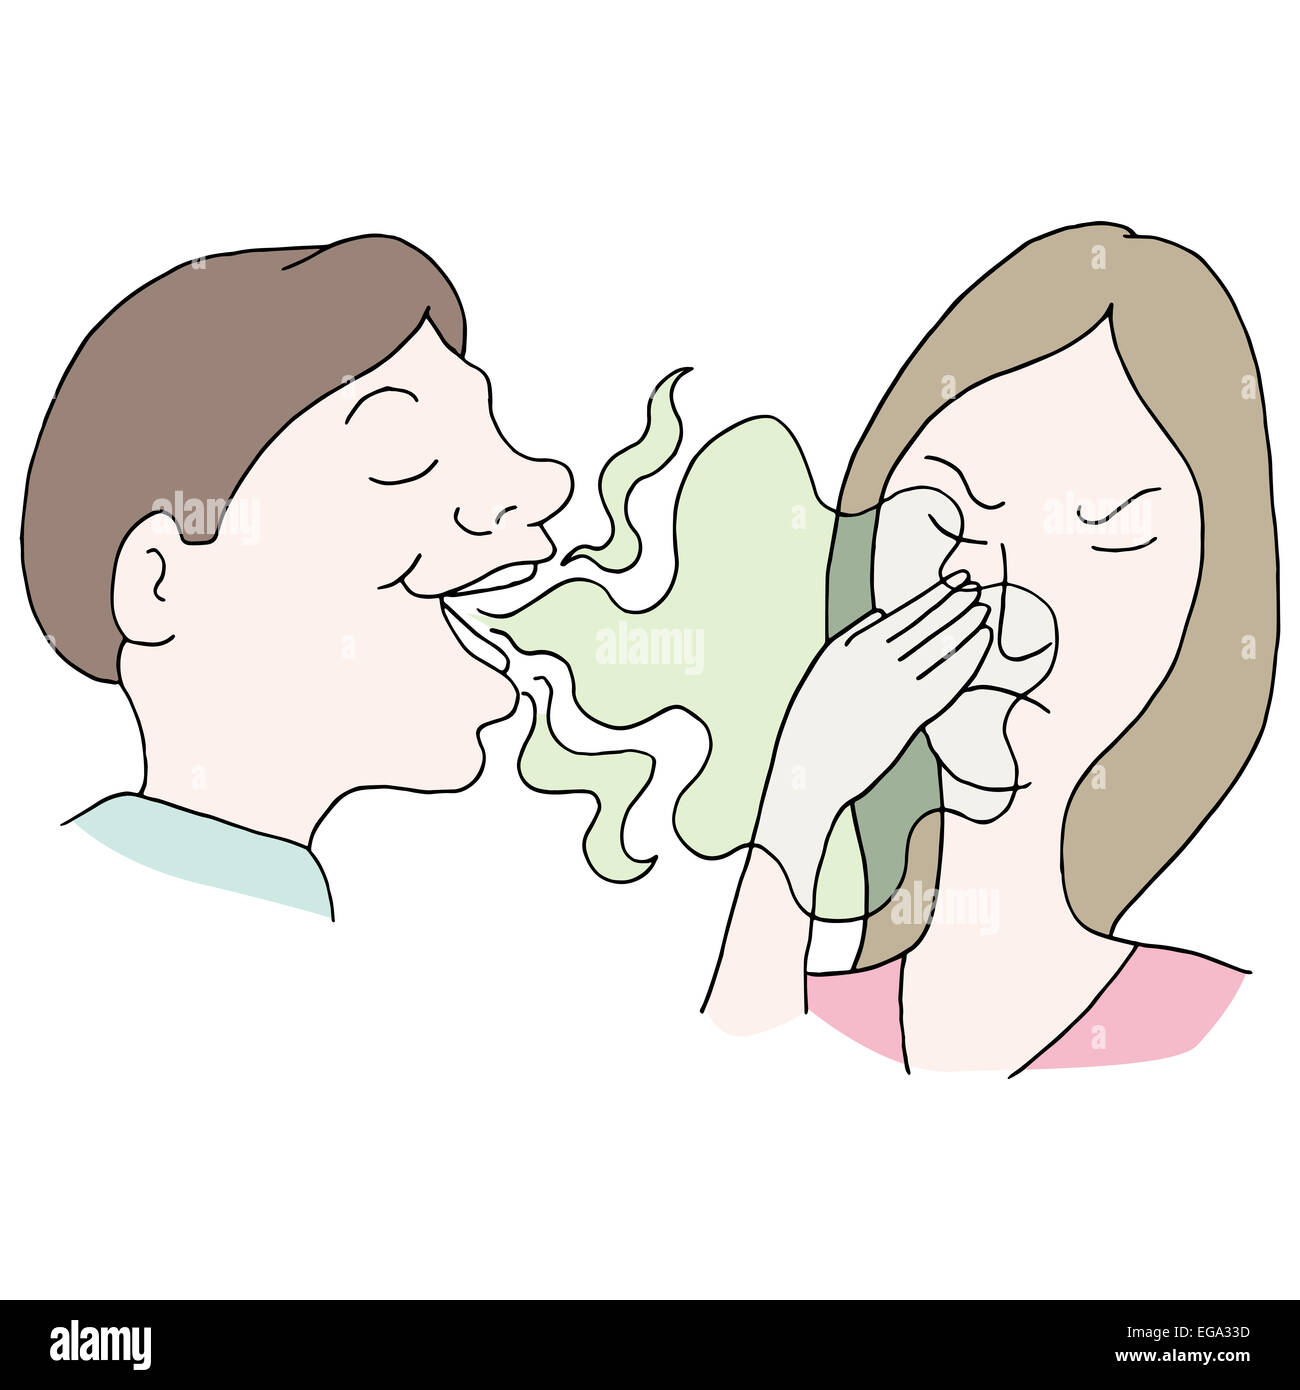 An image of a man with bad breath. Stock Photo